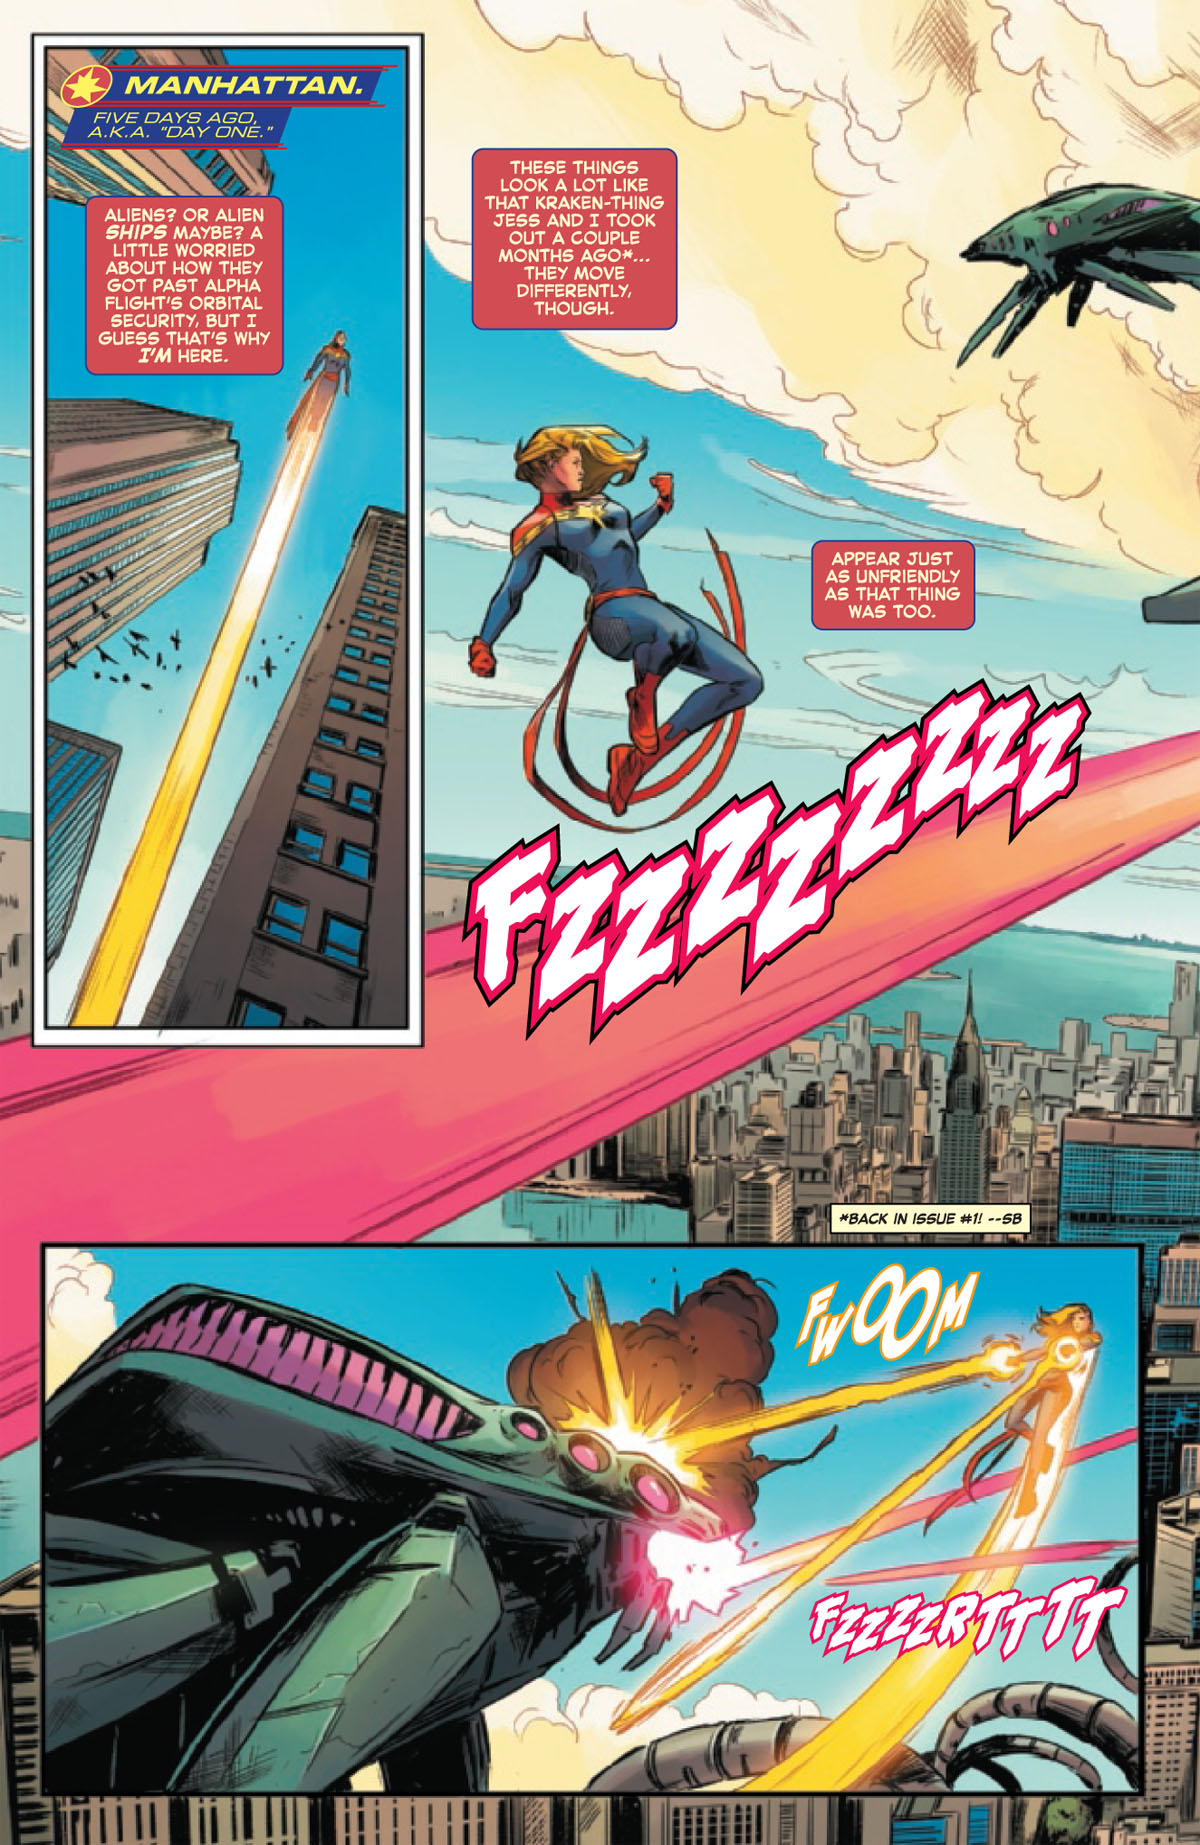 Captain Marvel #8 page 2